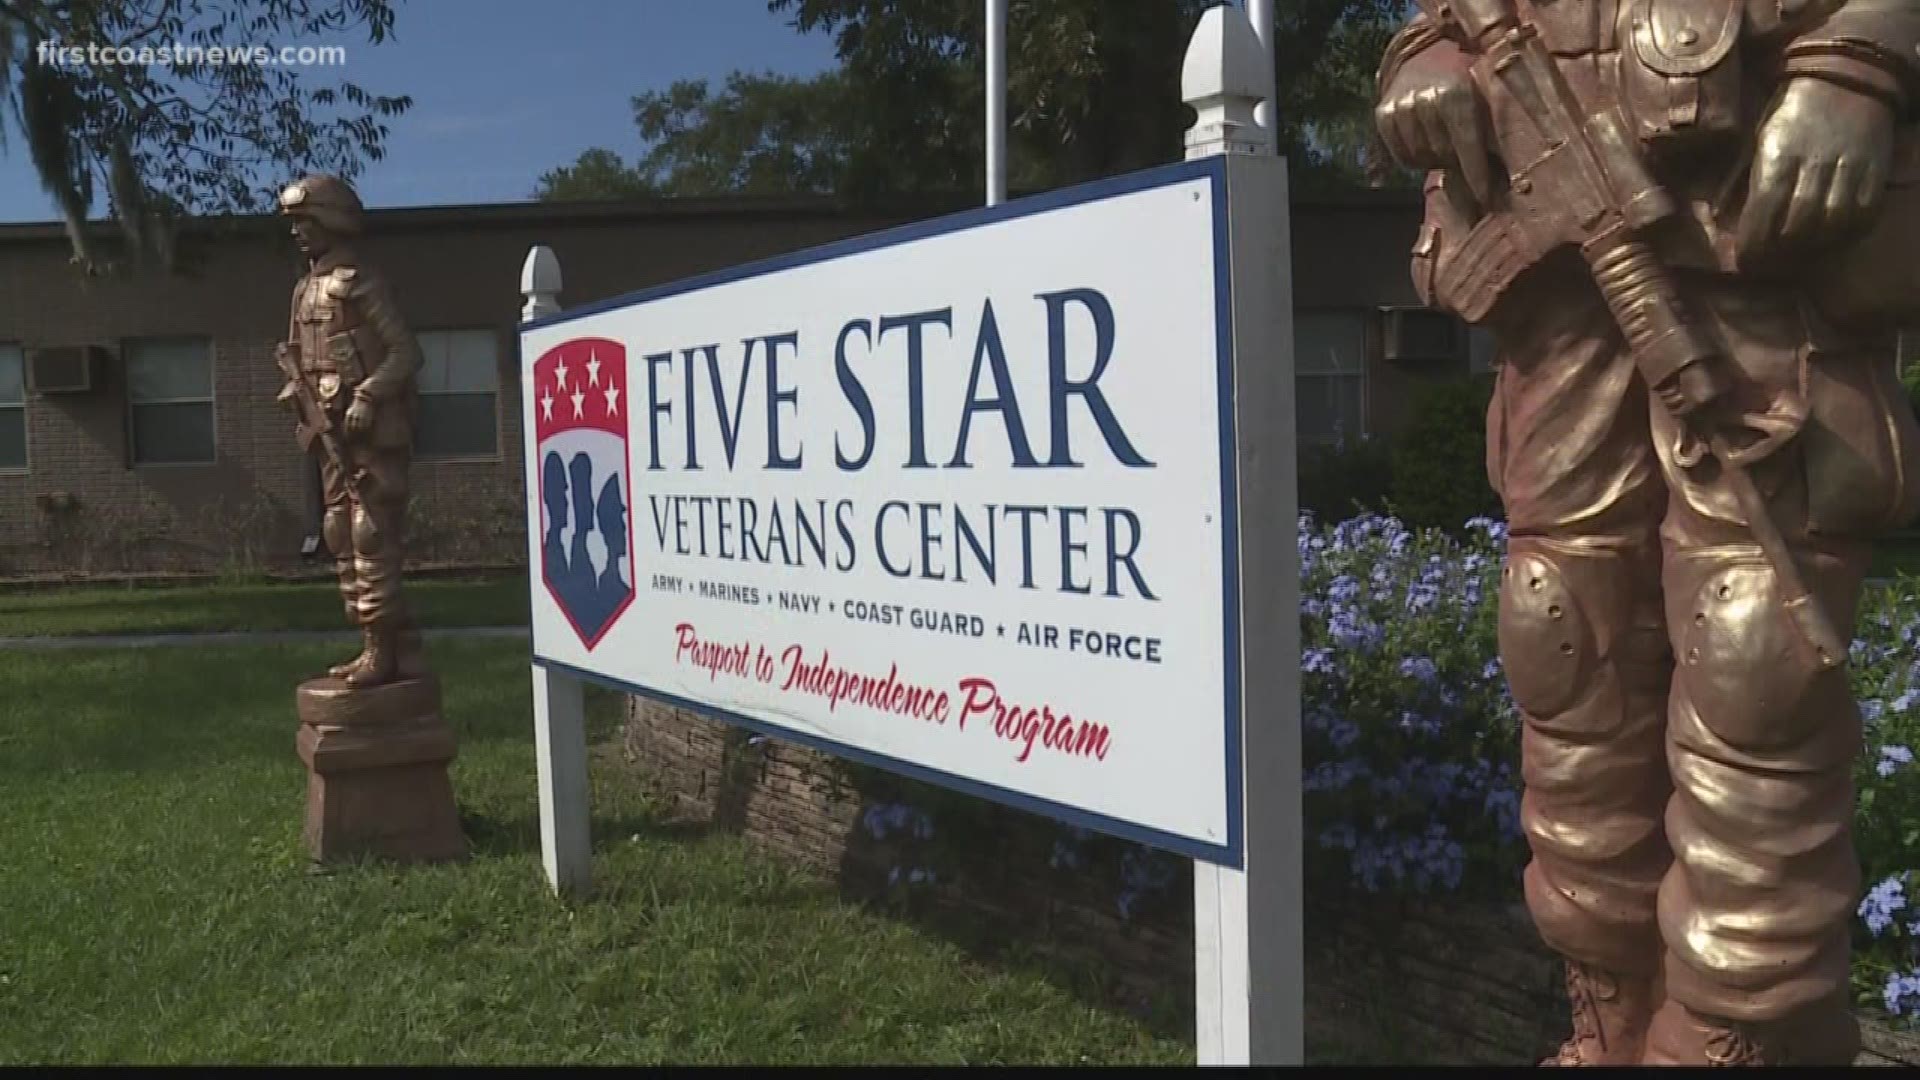 At Five Star Veteran Center in Arlington, On Your Side heard from a number of those who served in the armed services.